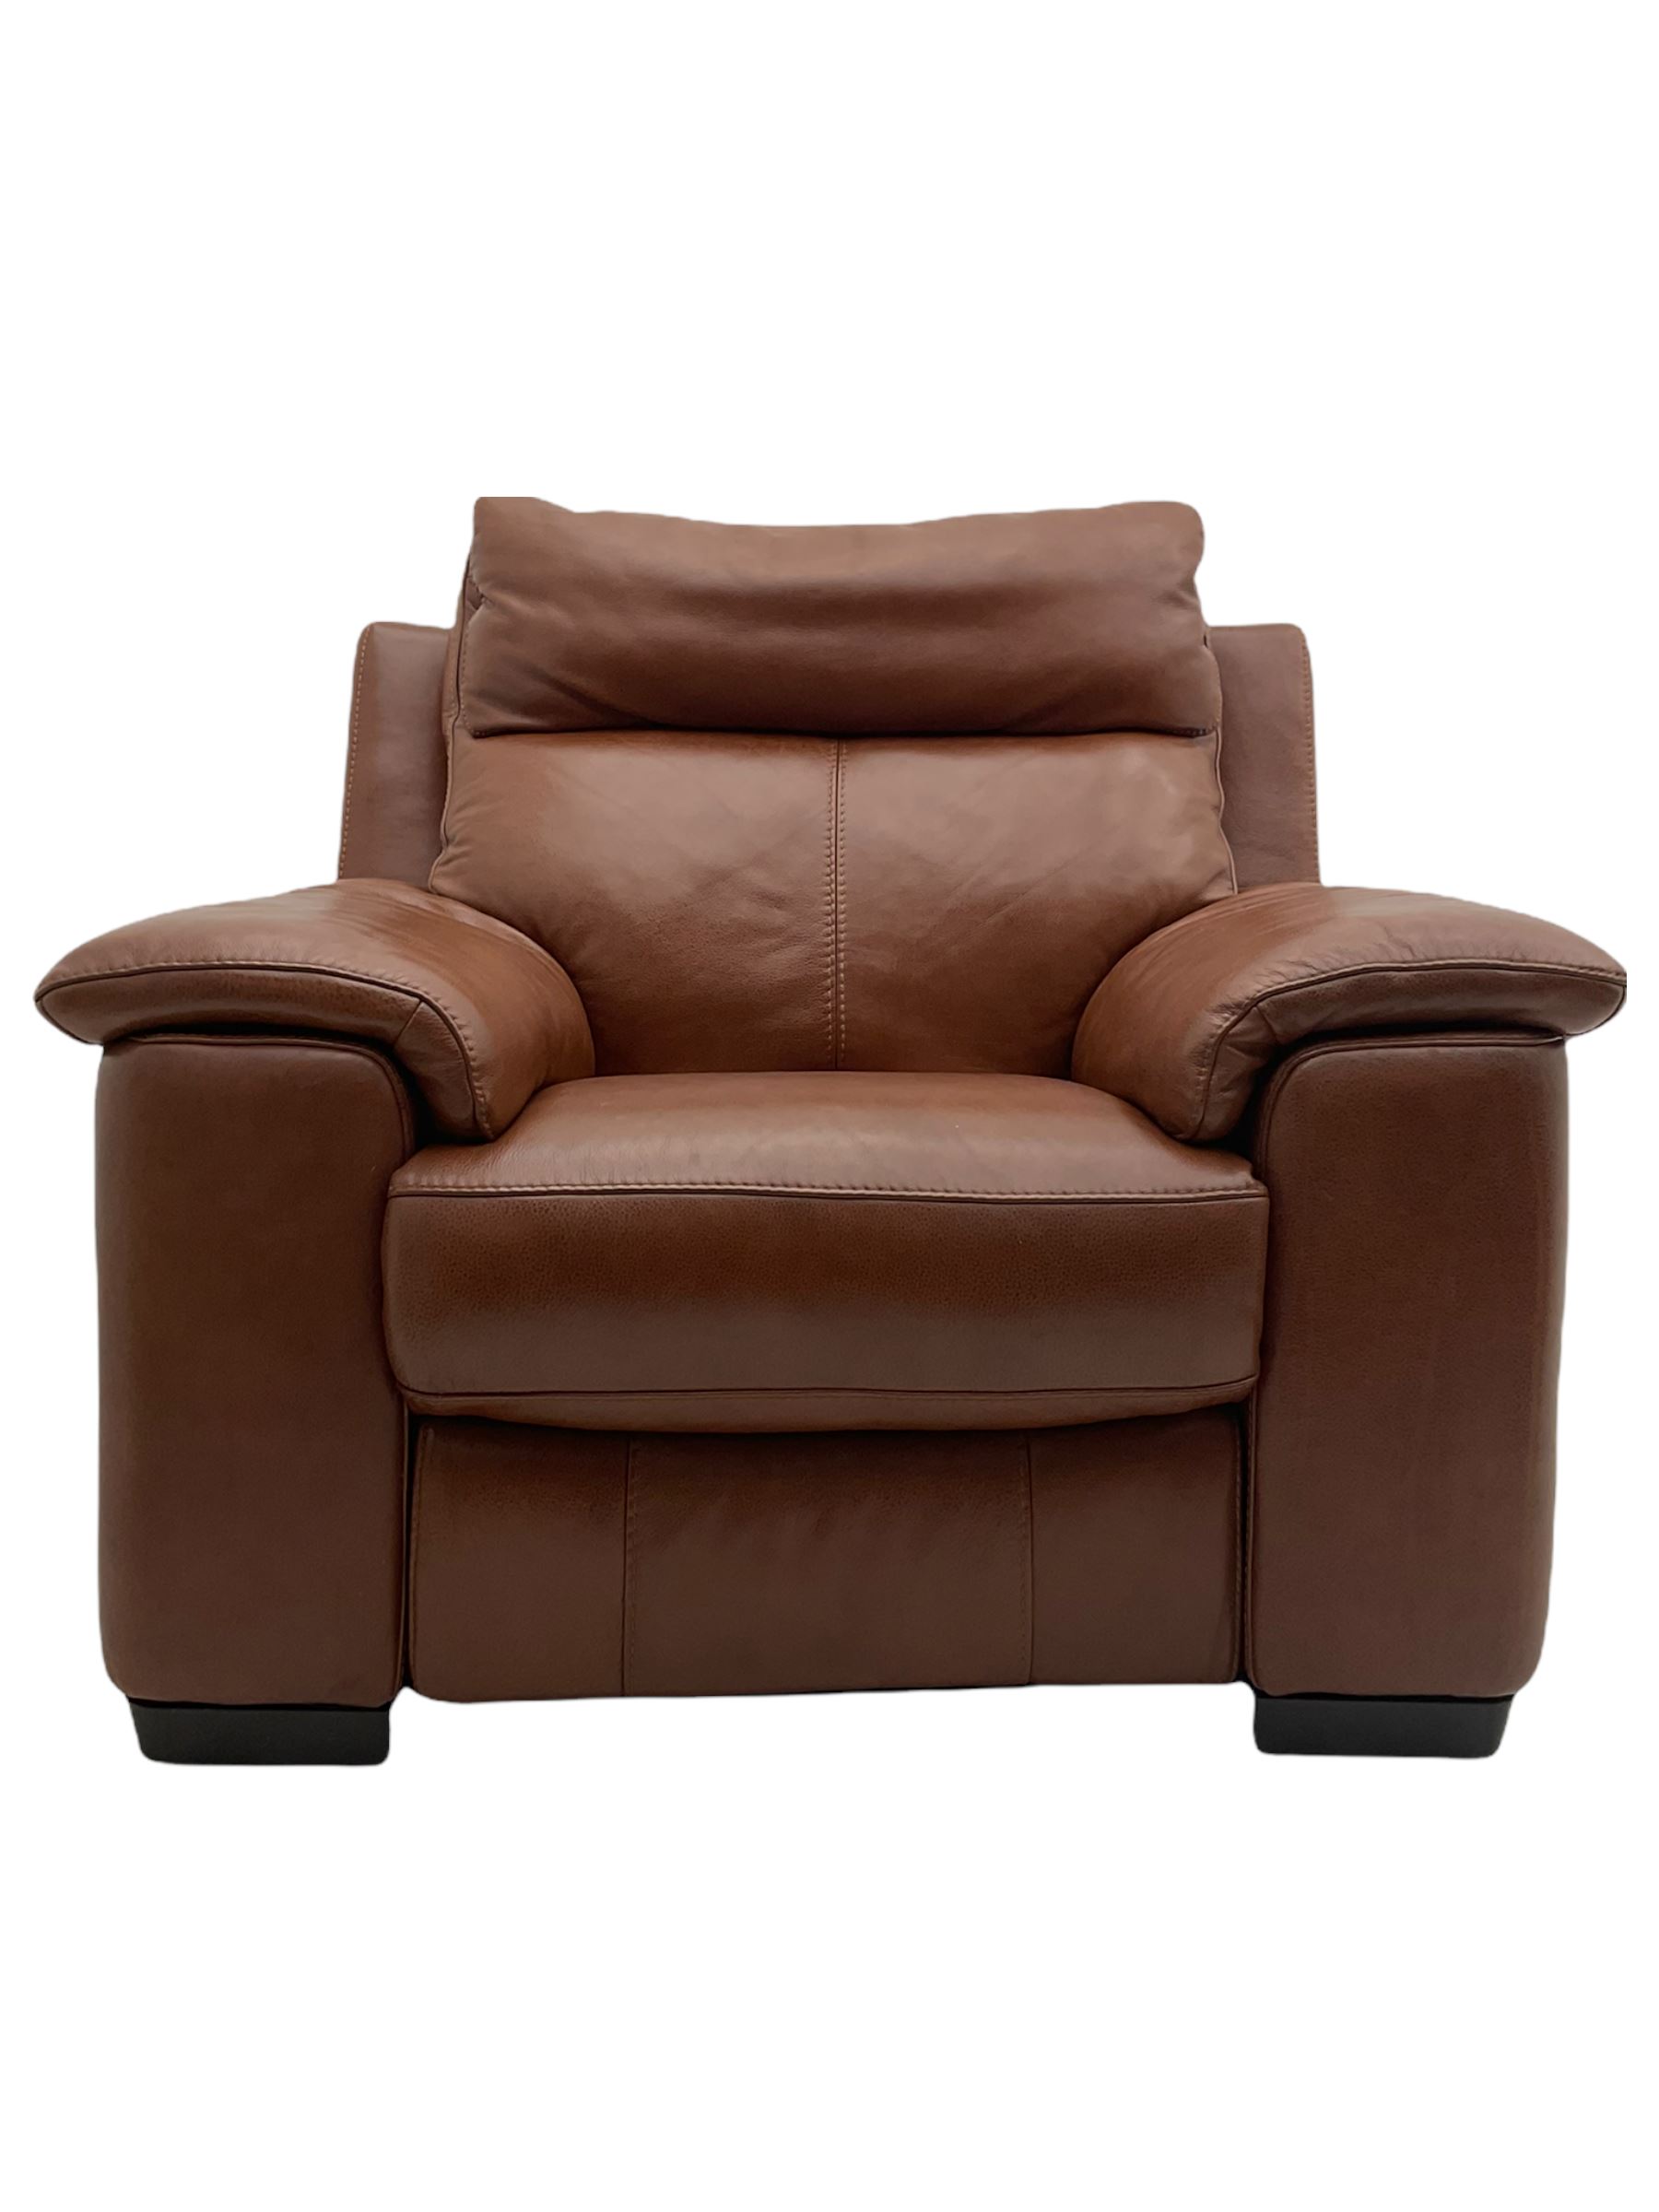 Three electric reclining sofa upholstered in tan leather - Image 13 of 23